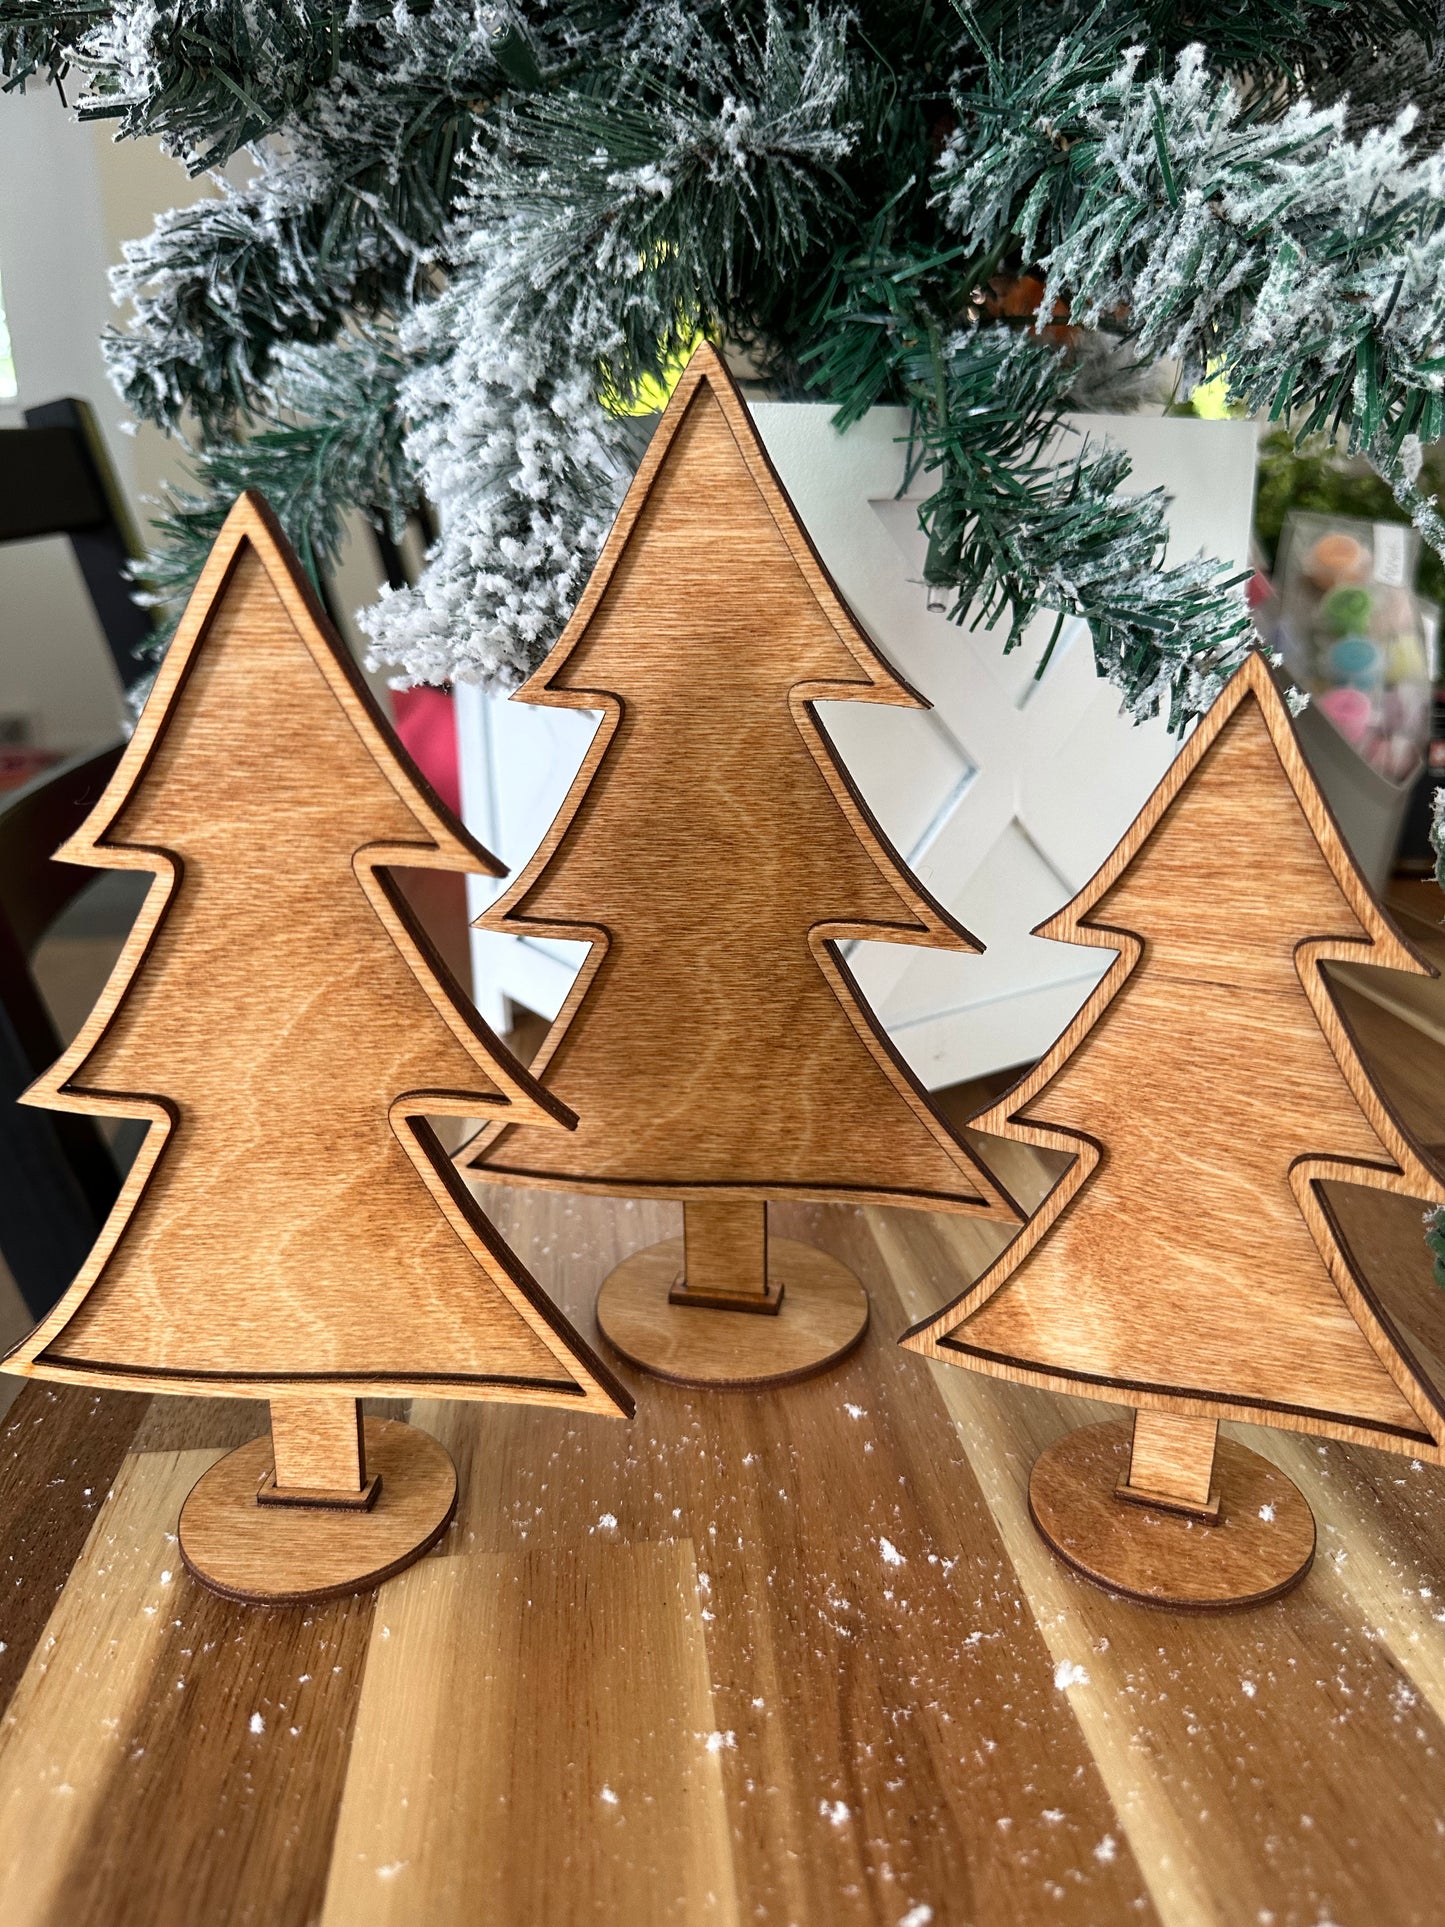 Set of 3 wooden Christmas Trees